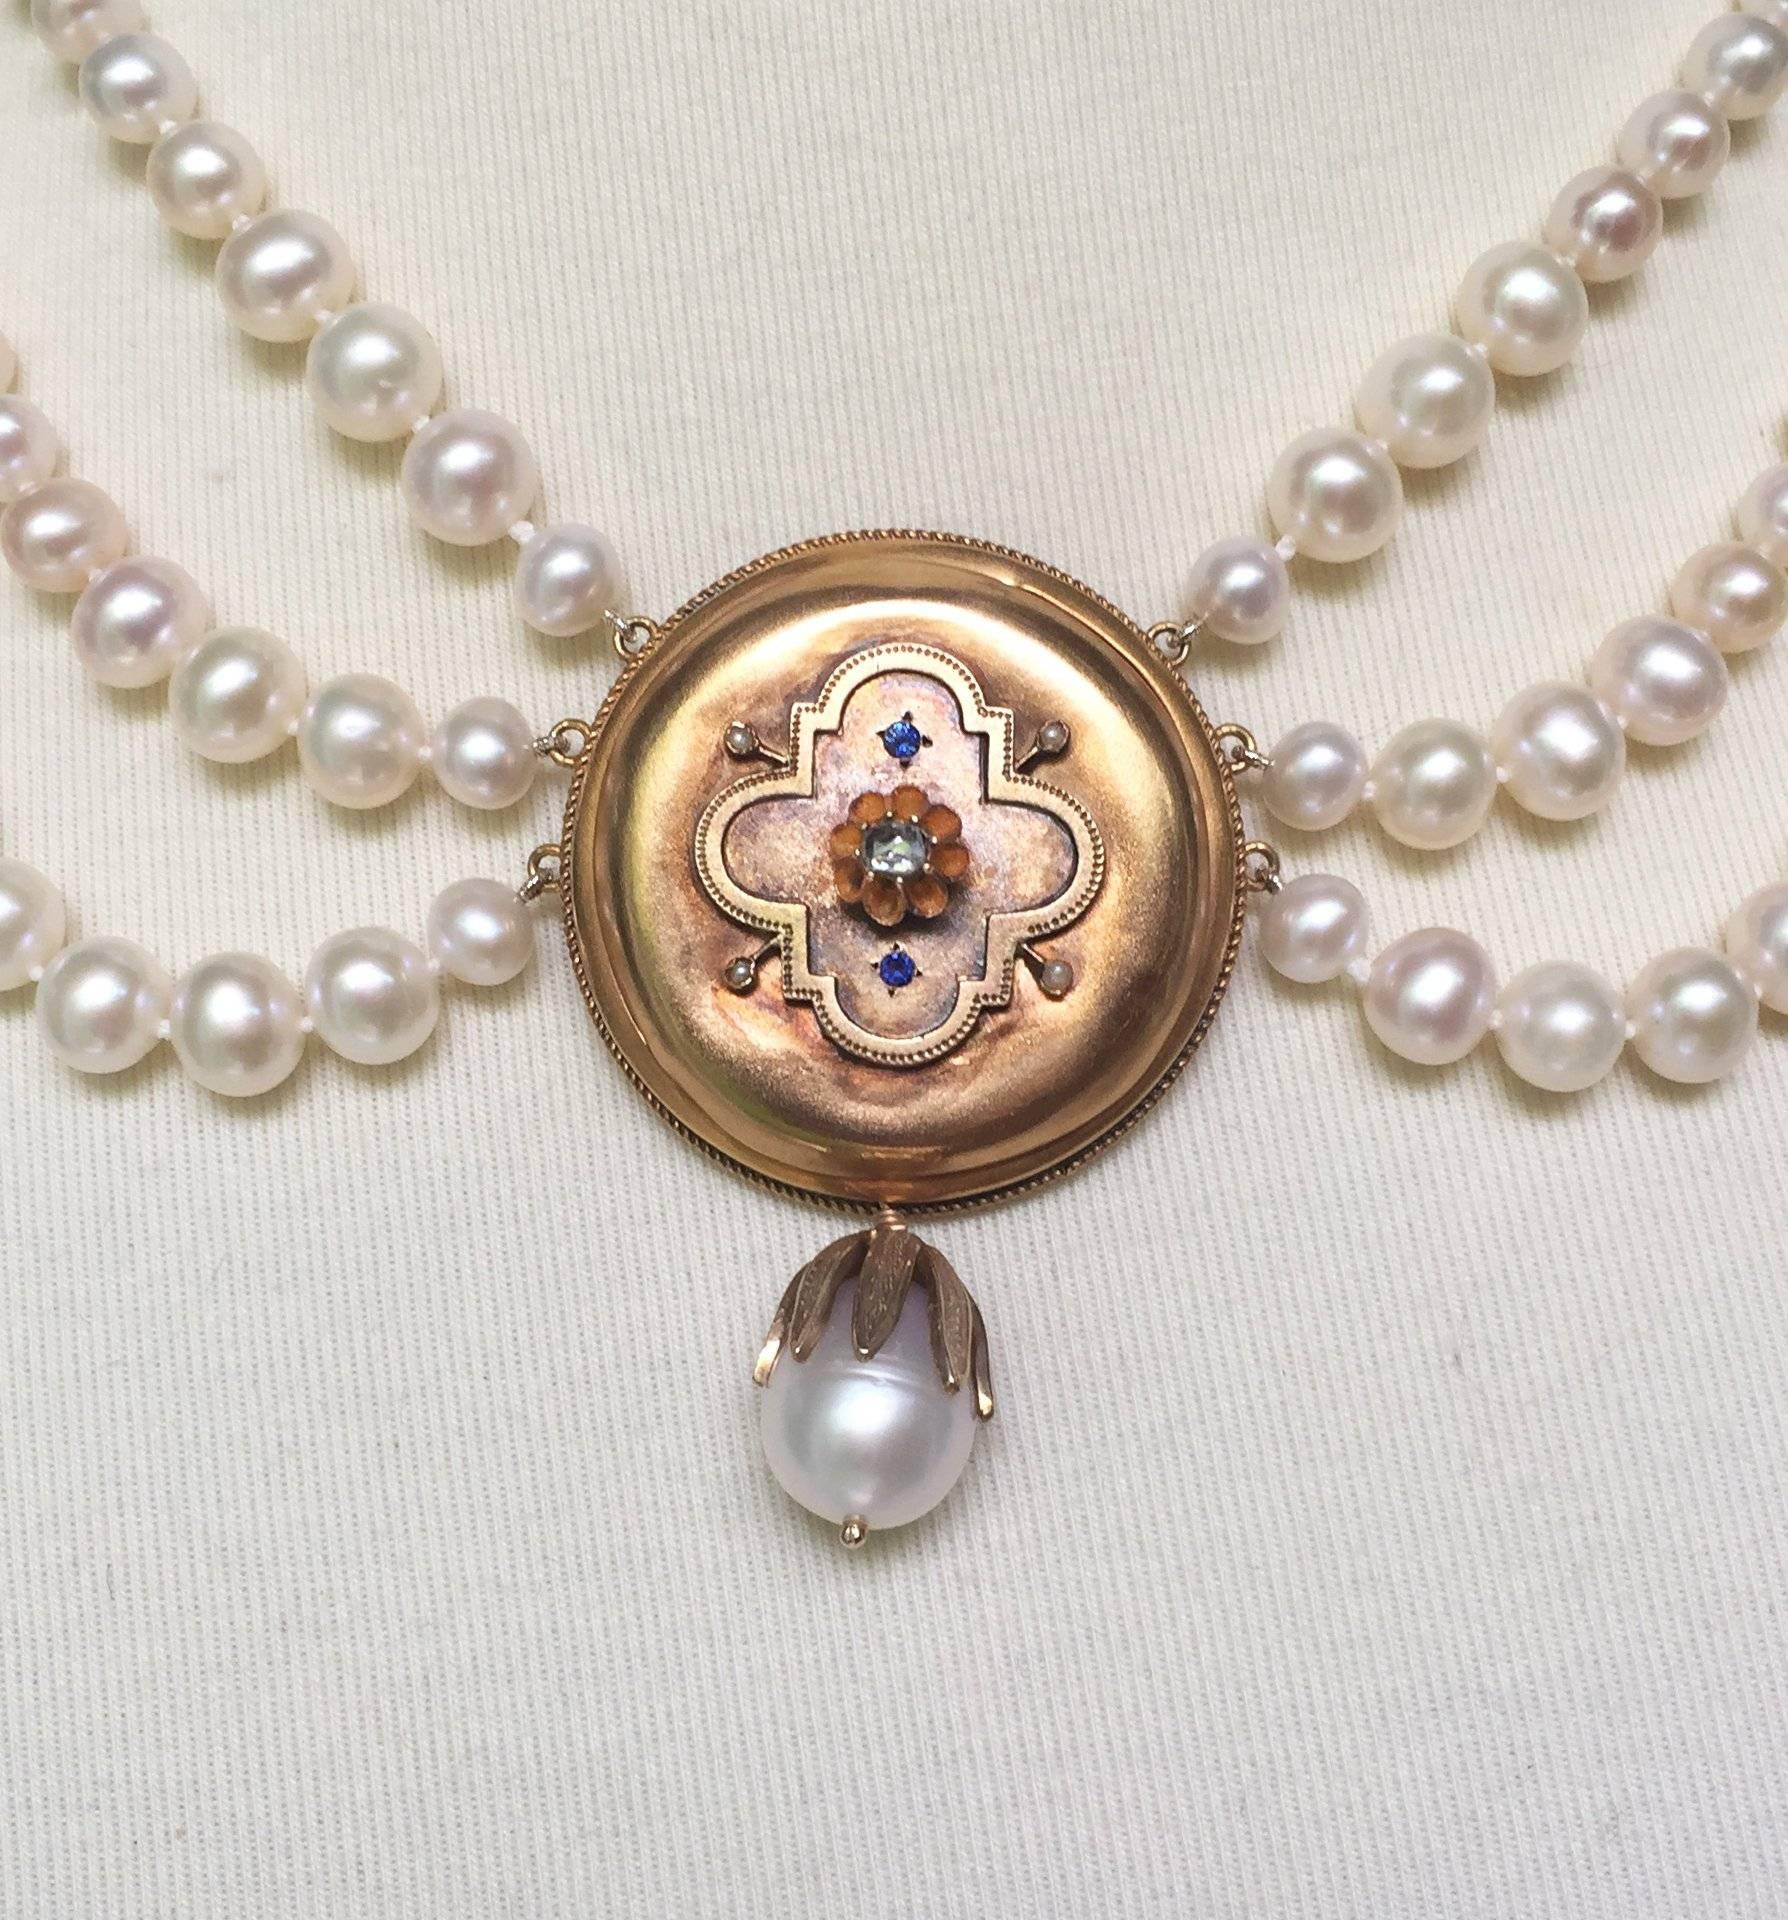 This dramatic pearl necklace is centered around a vintage 14 k yellow gold centerpiece with sapphires and a rough cut diamond. The diamond and sapphires are intricately placed into a beautiful geometric pattern that follows through to the rest of